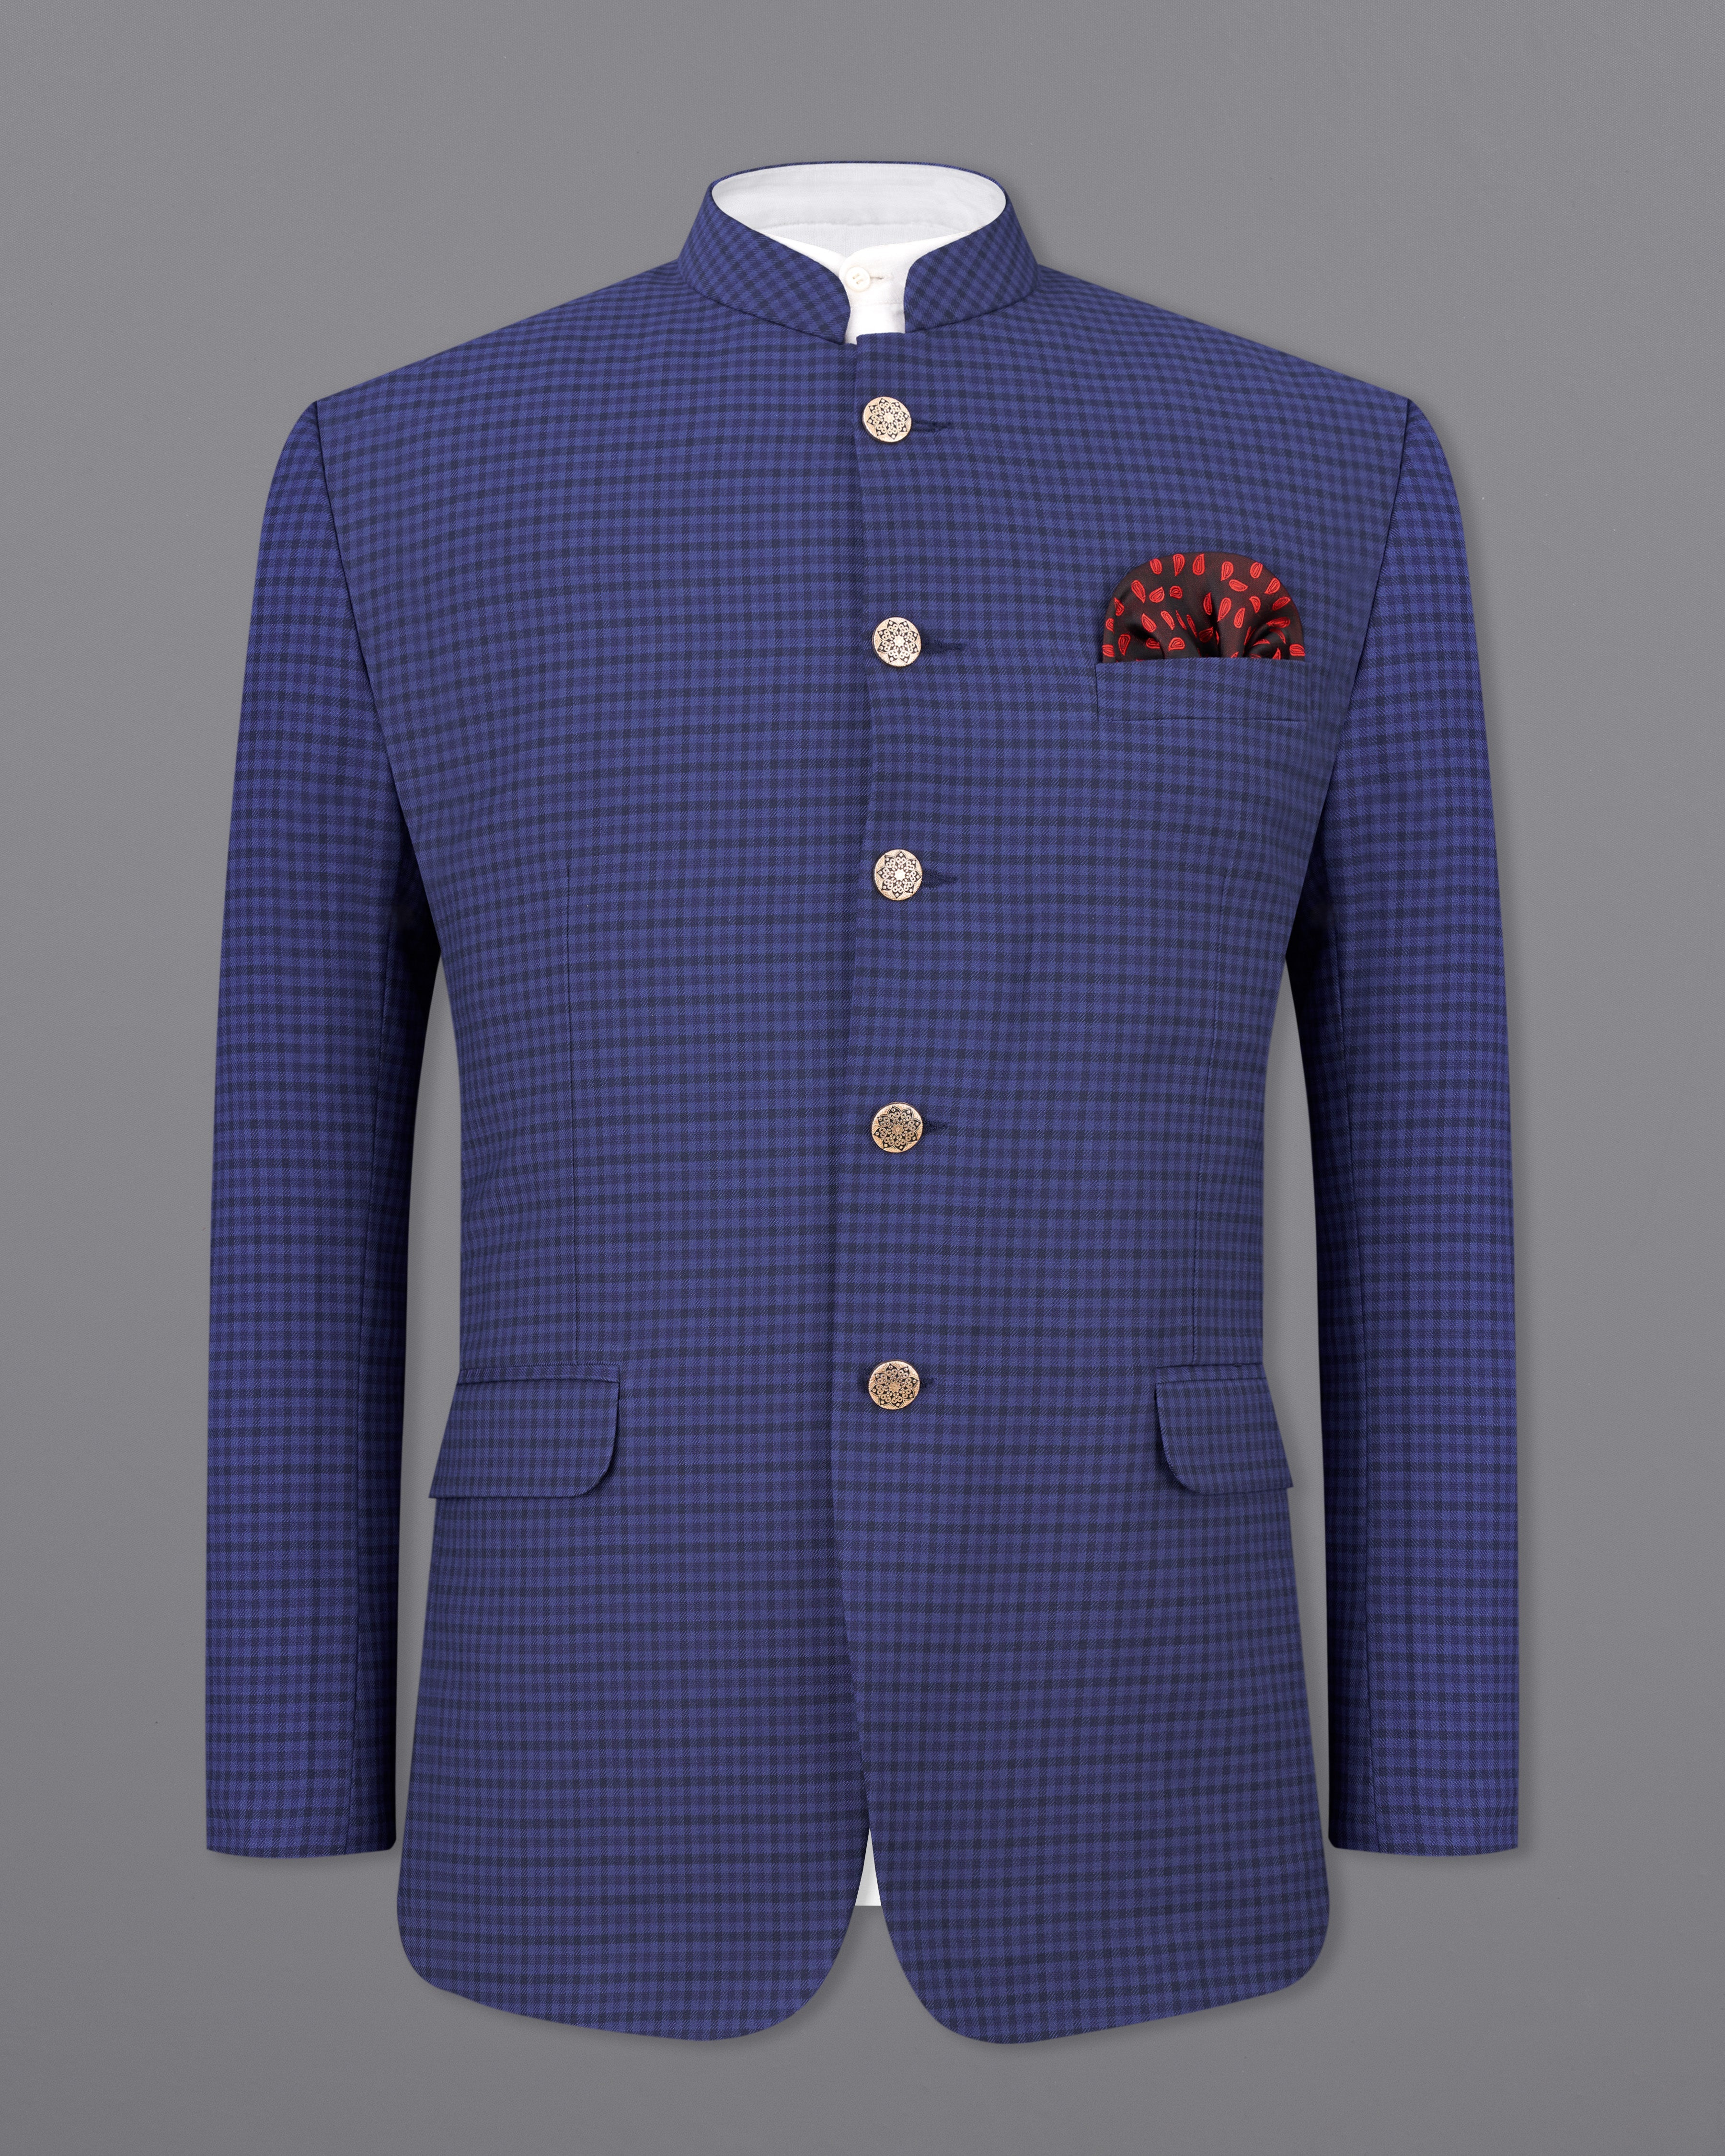 Victoria Blue Gingham Checkered Bandhgala Suit ST2496-BG-36, ST2496-BG-38, ST2496-BG-40, ST2496-BG-42, ST2496-BG-44, ST2496-BG-46, ST2496-BG-48, ST2496-BG-50, ST2496-BG-52, ST2496-BG-54, ST2496-BG-56, ST2496-BG-58, ST2496-BG-68